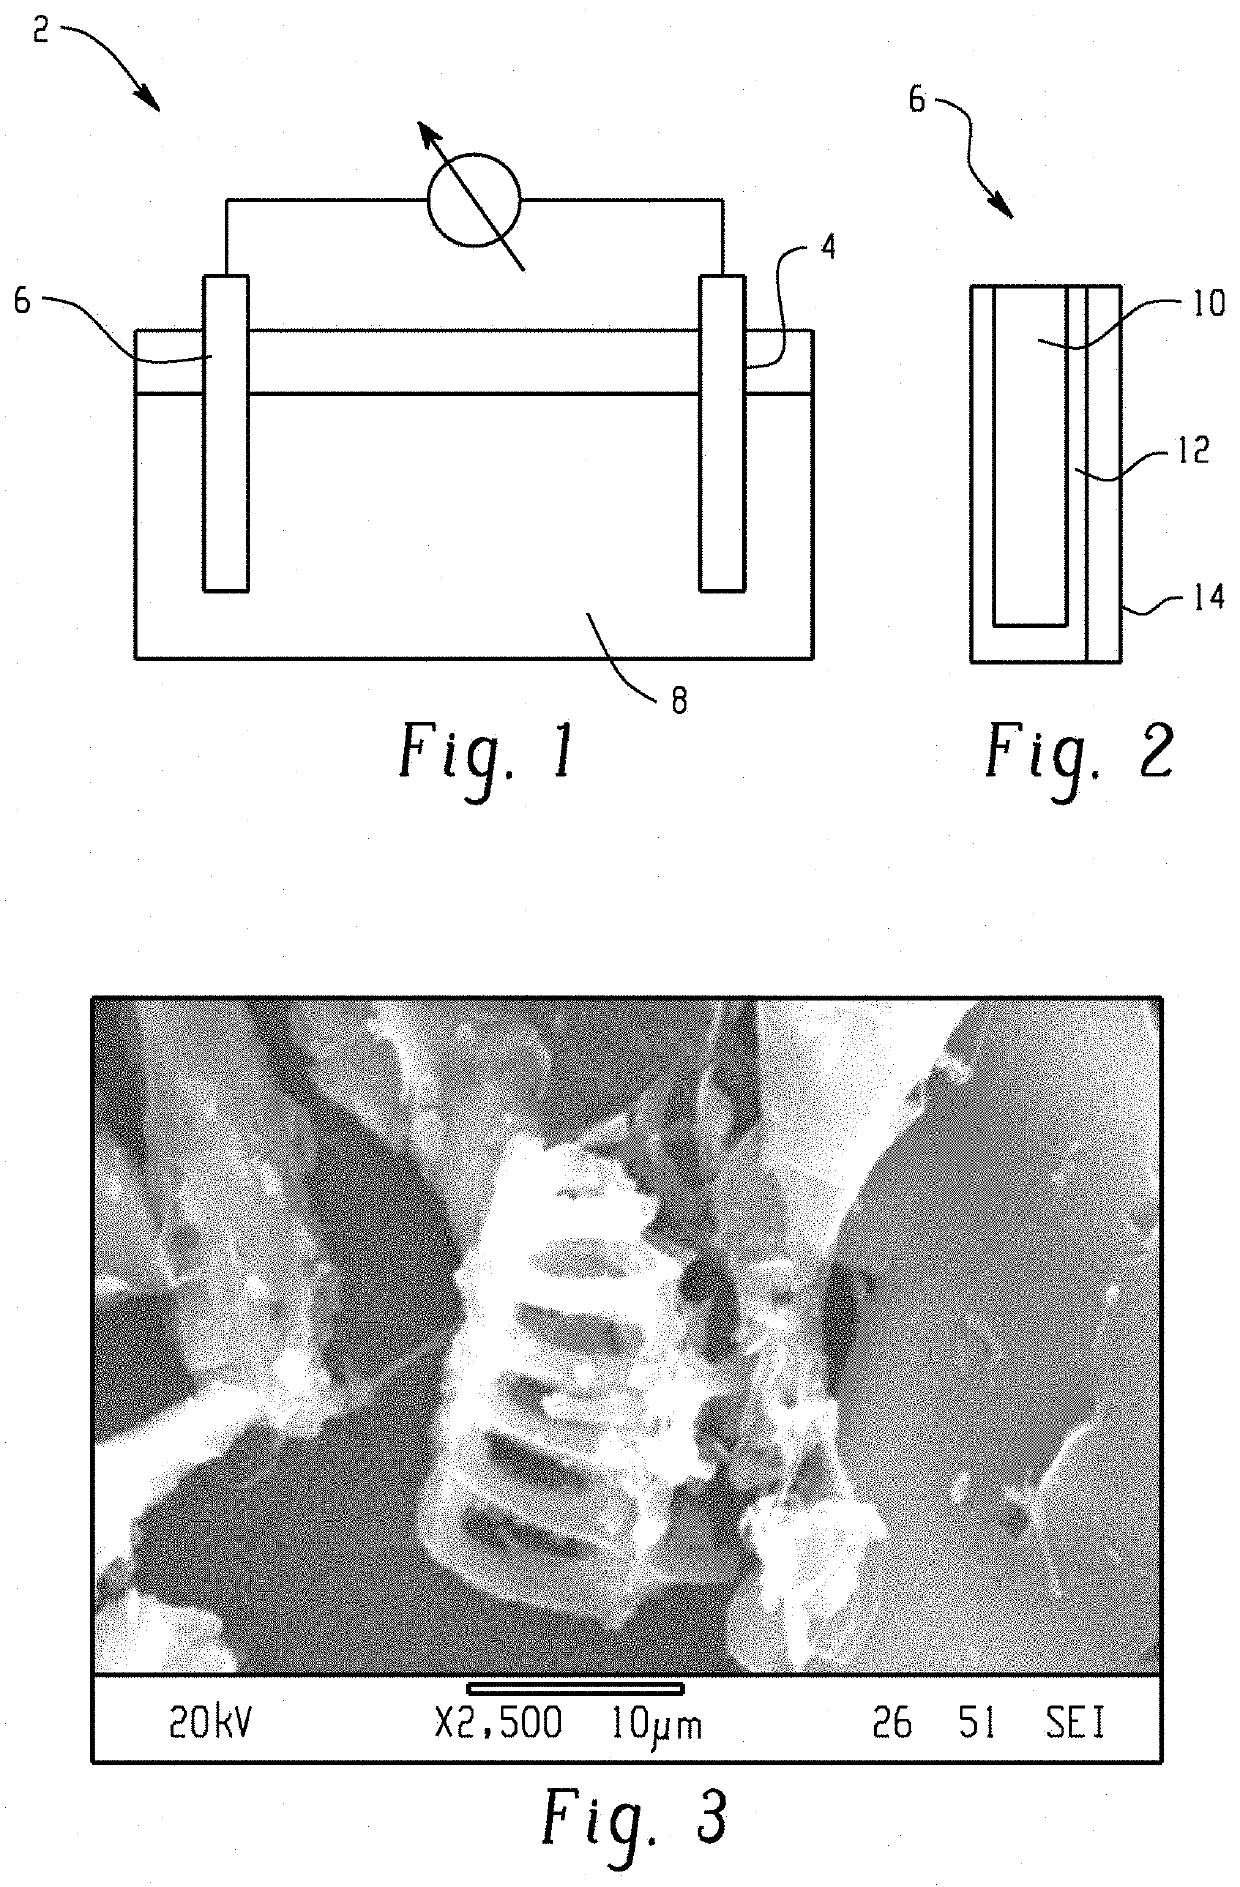 Method of forming a carbon based active layer for an anode of a lead carbon battery and the active layer formed therefrom